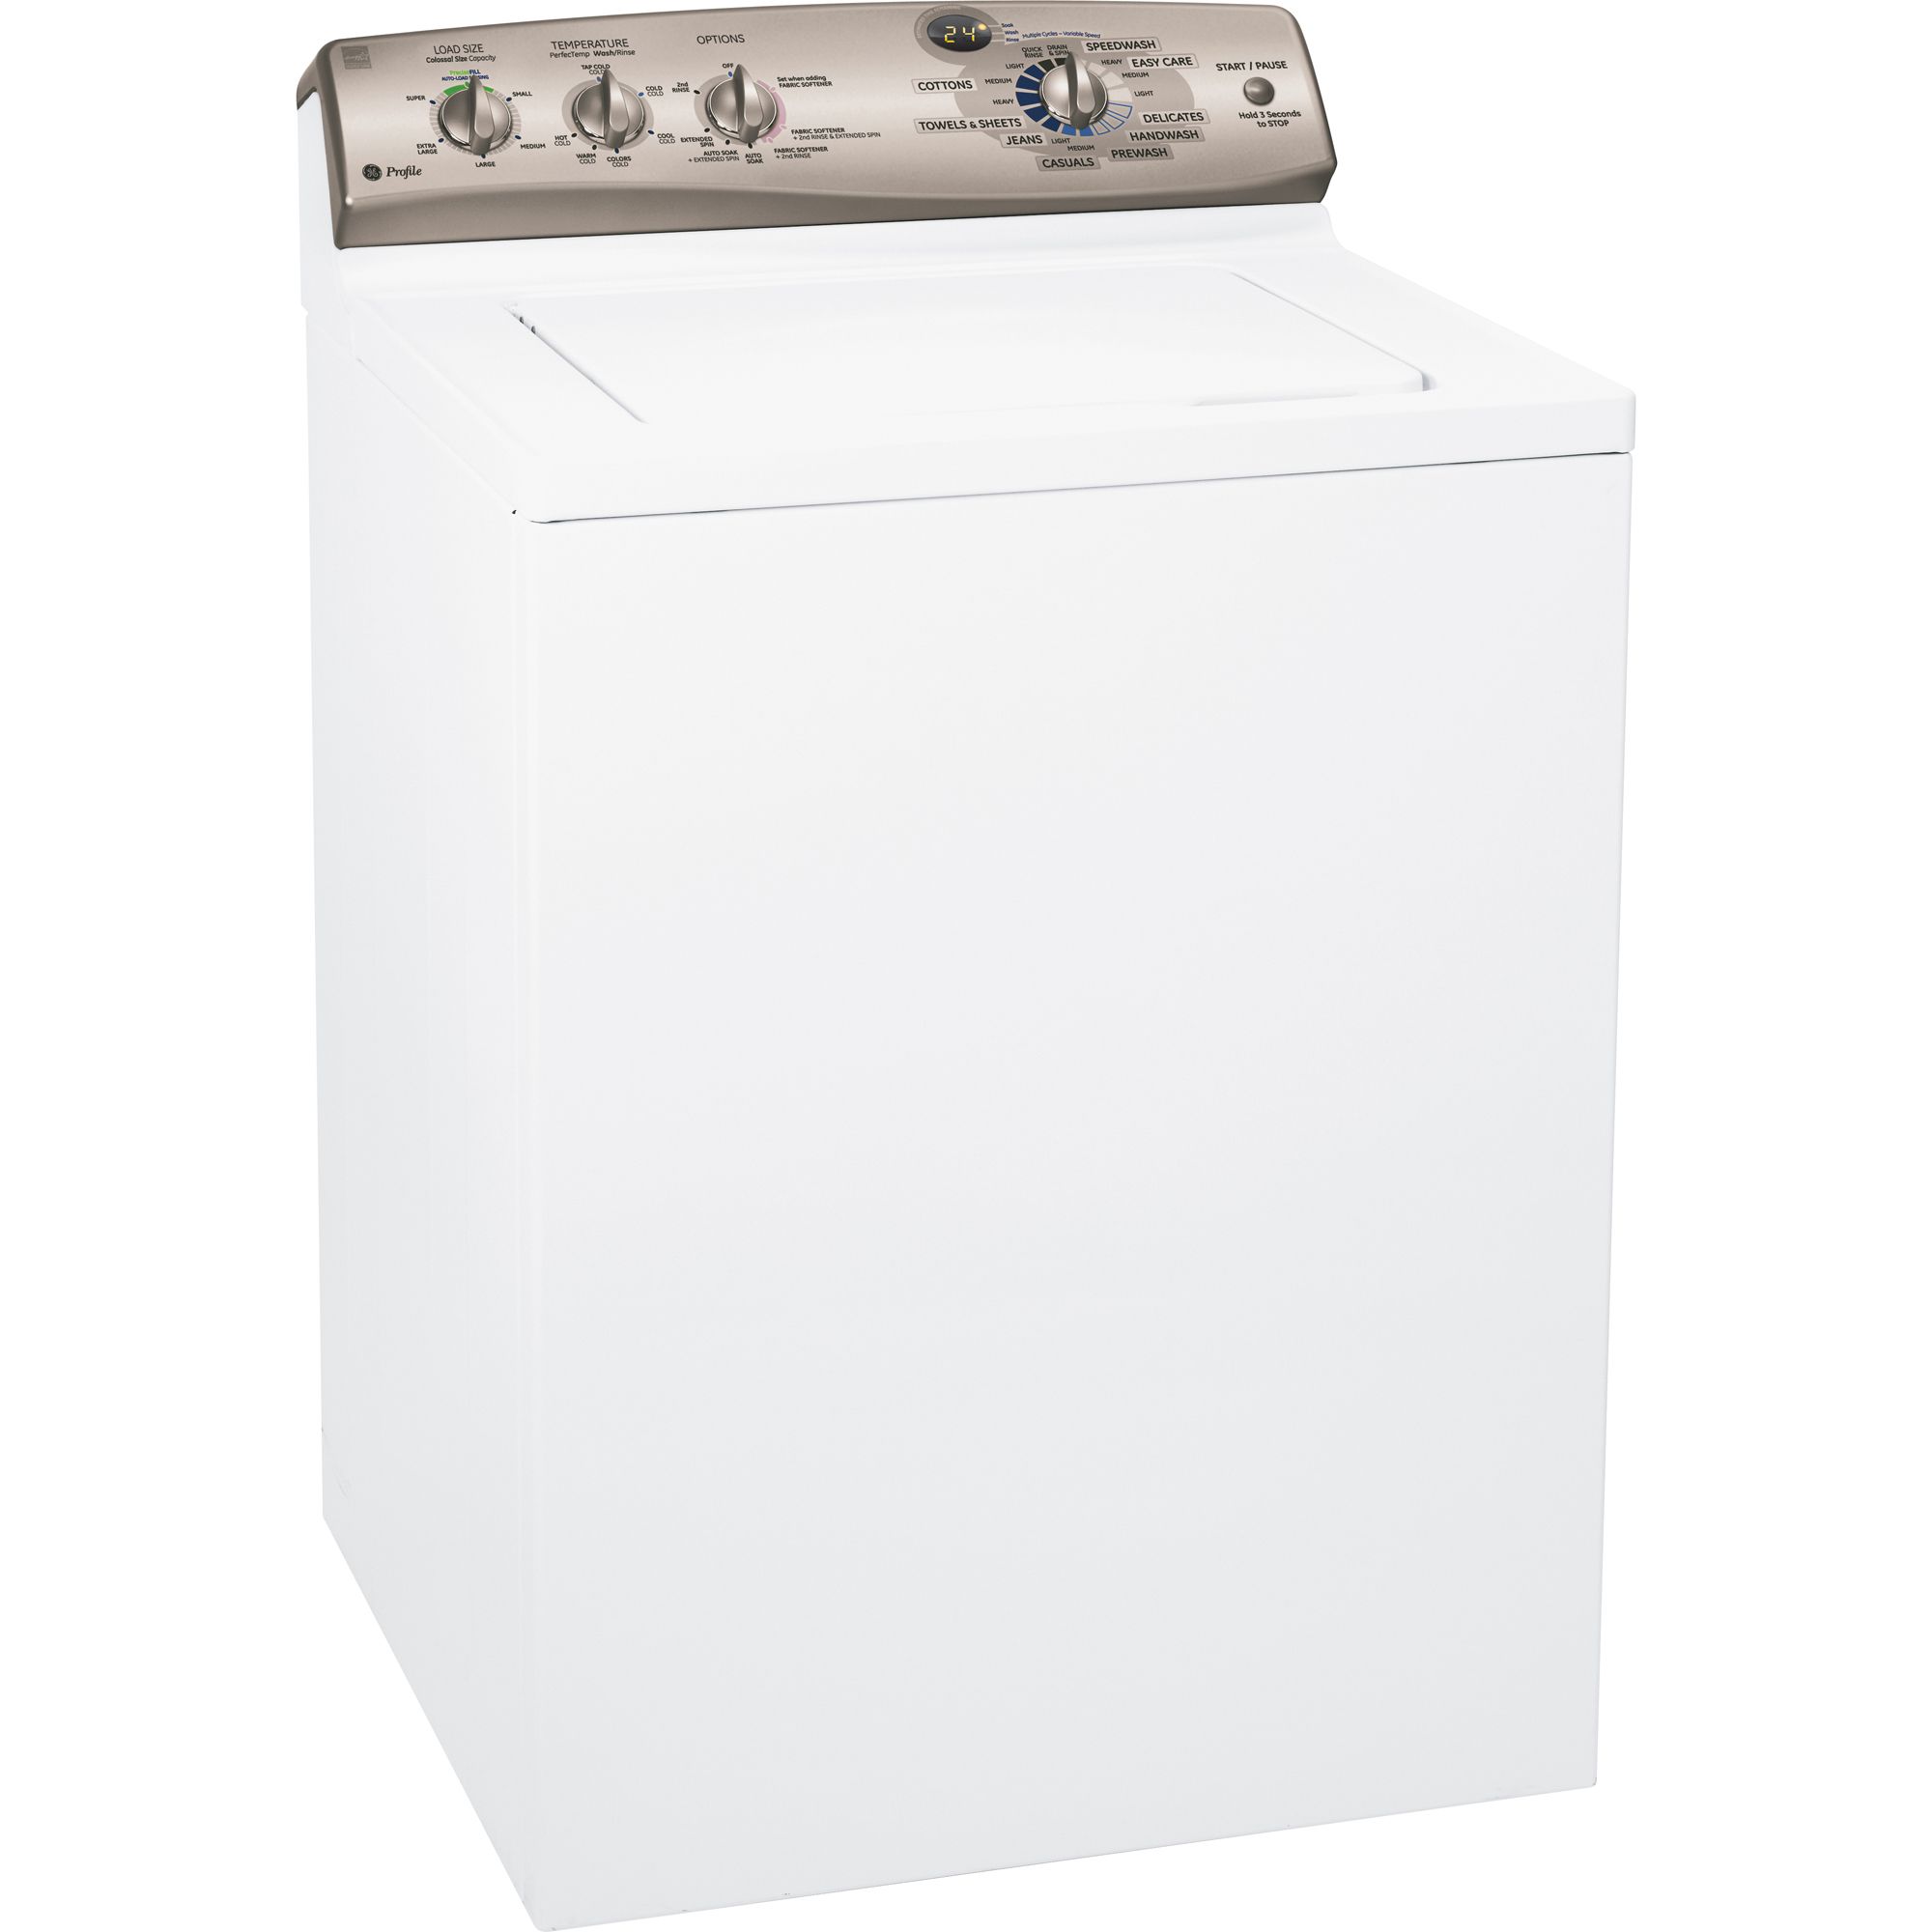 Are GE clothes washers energy efficient?